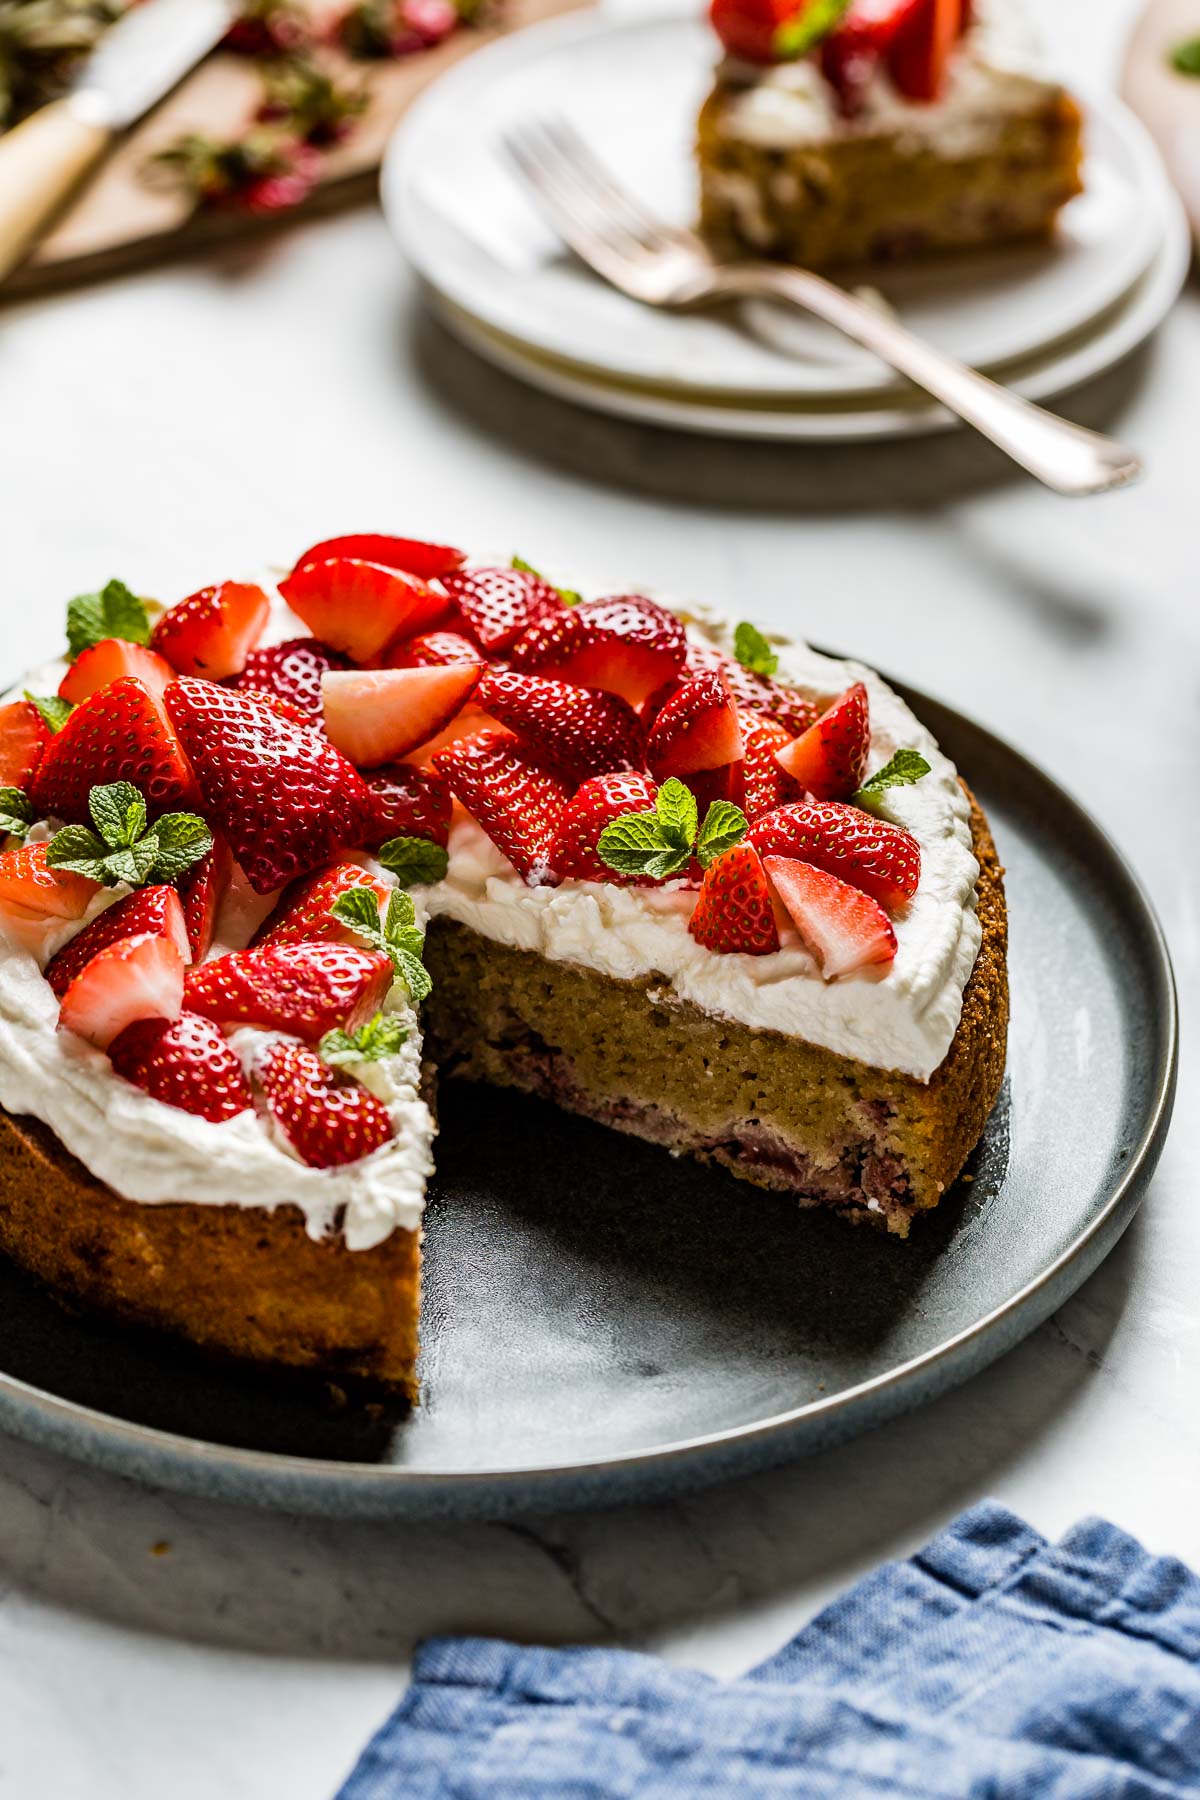 strawberry almond cake is served on a plate with a slice on a plate in the background